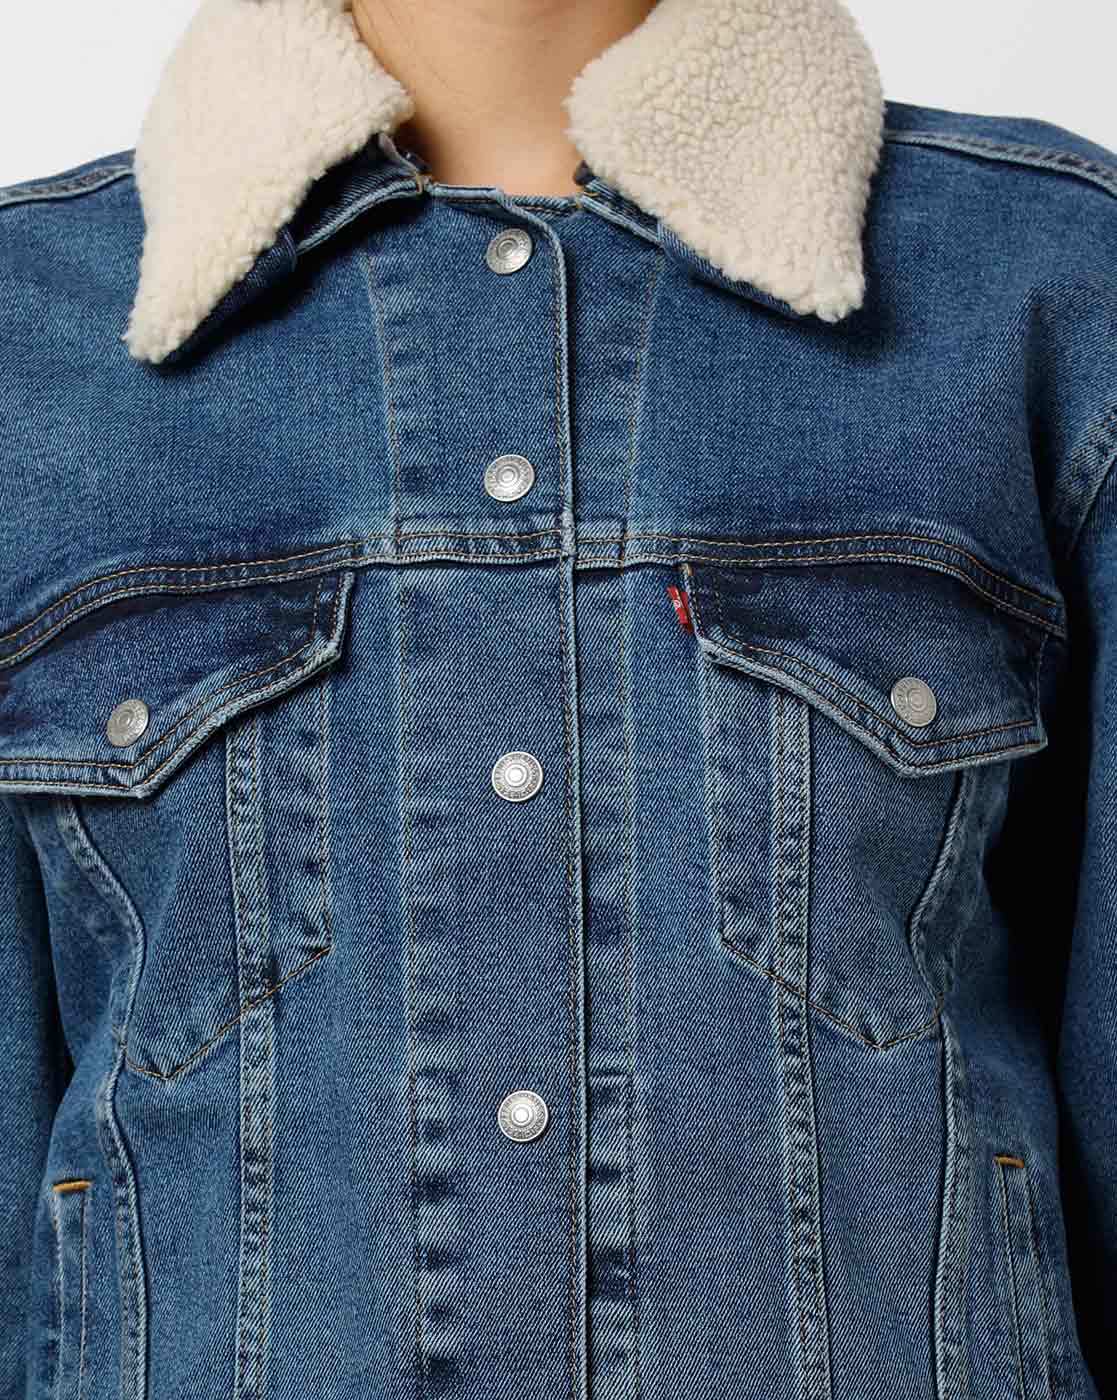 Buy Denim Jacket With Fur Online In India - Etsy India-sgquangbinhtourist.com.vn